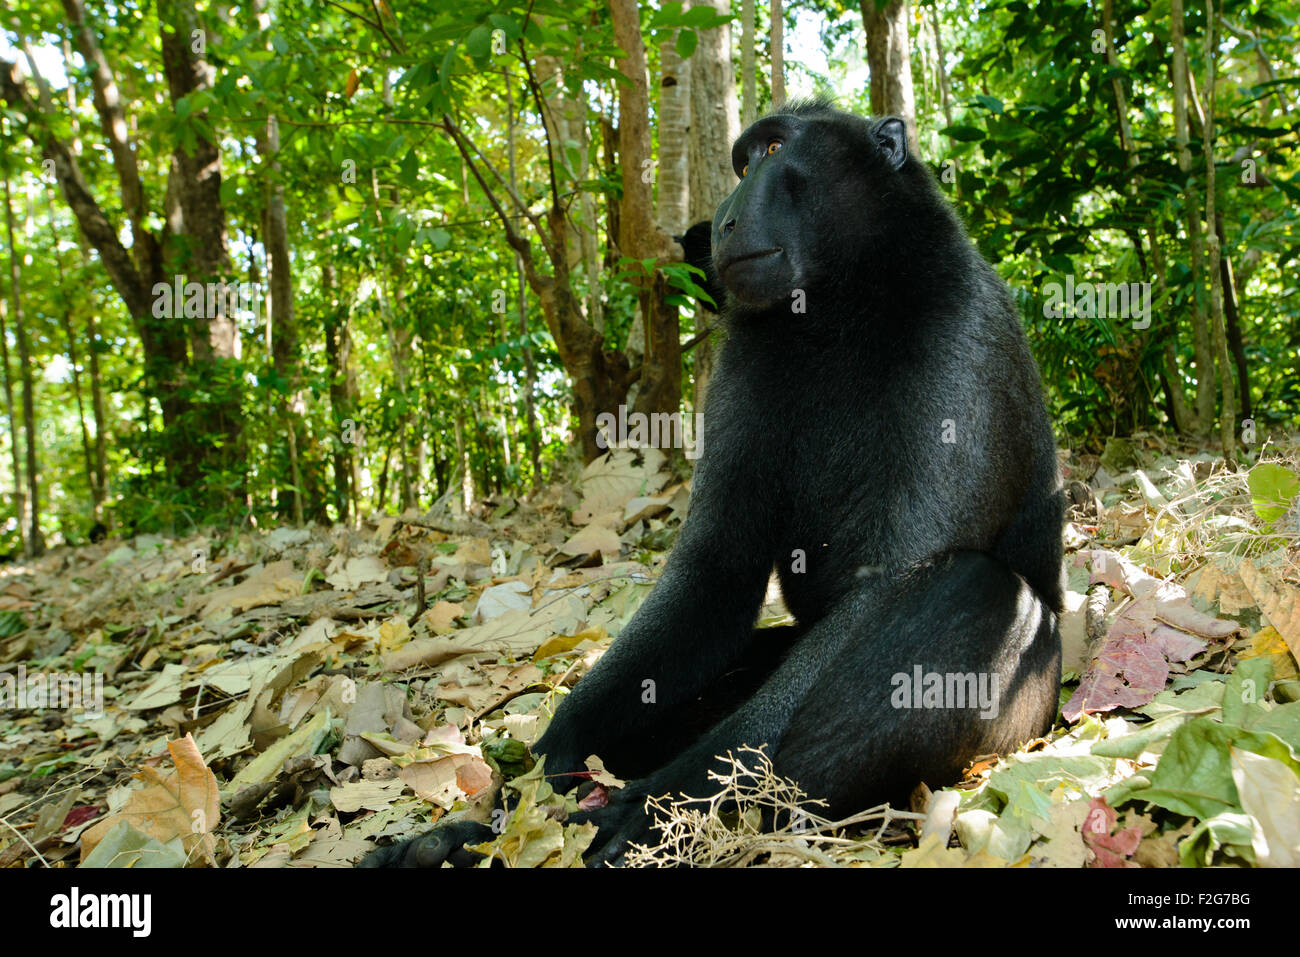 a Single black crested macaque also known as the celebes black macaque relaxes on the ground in the tropical forest Stock Photo